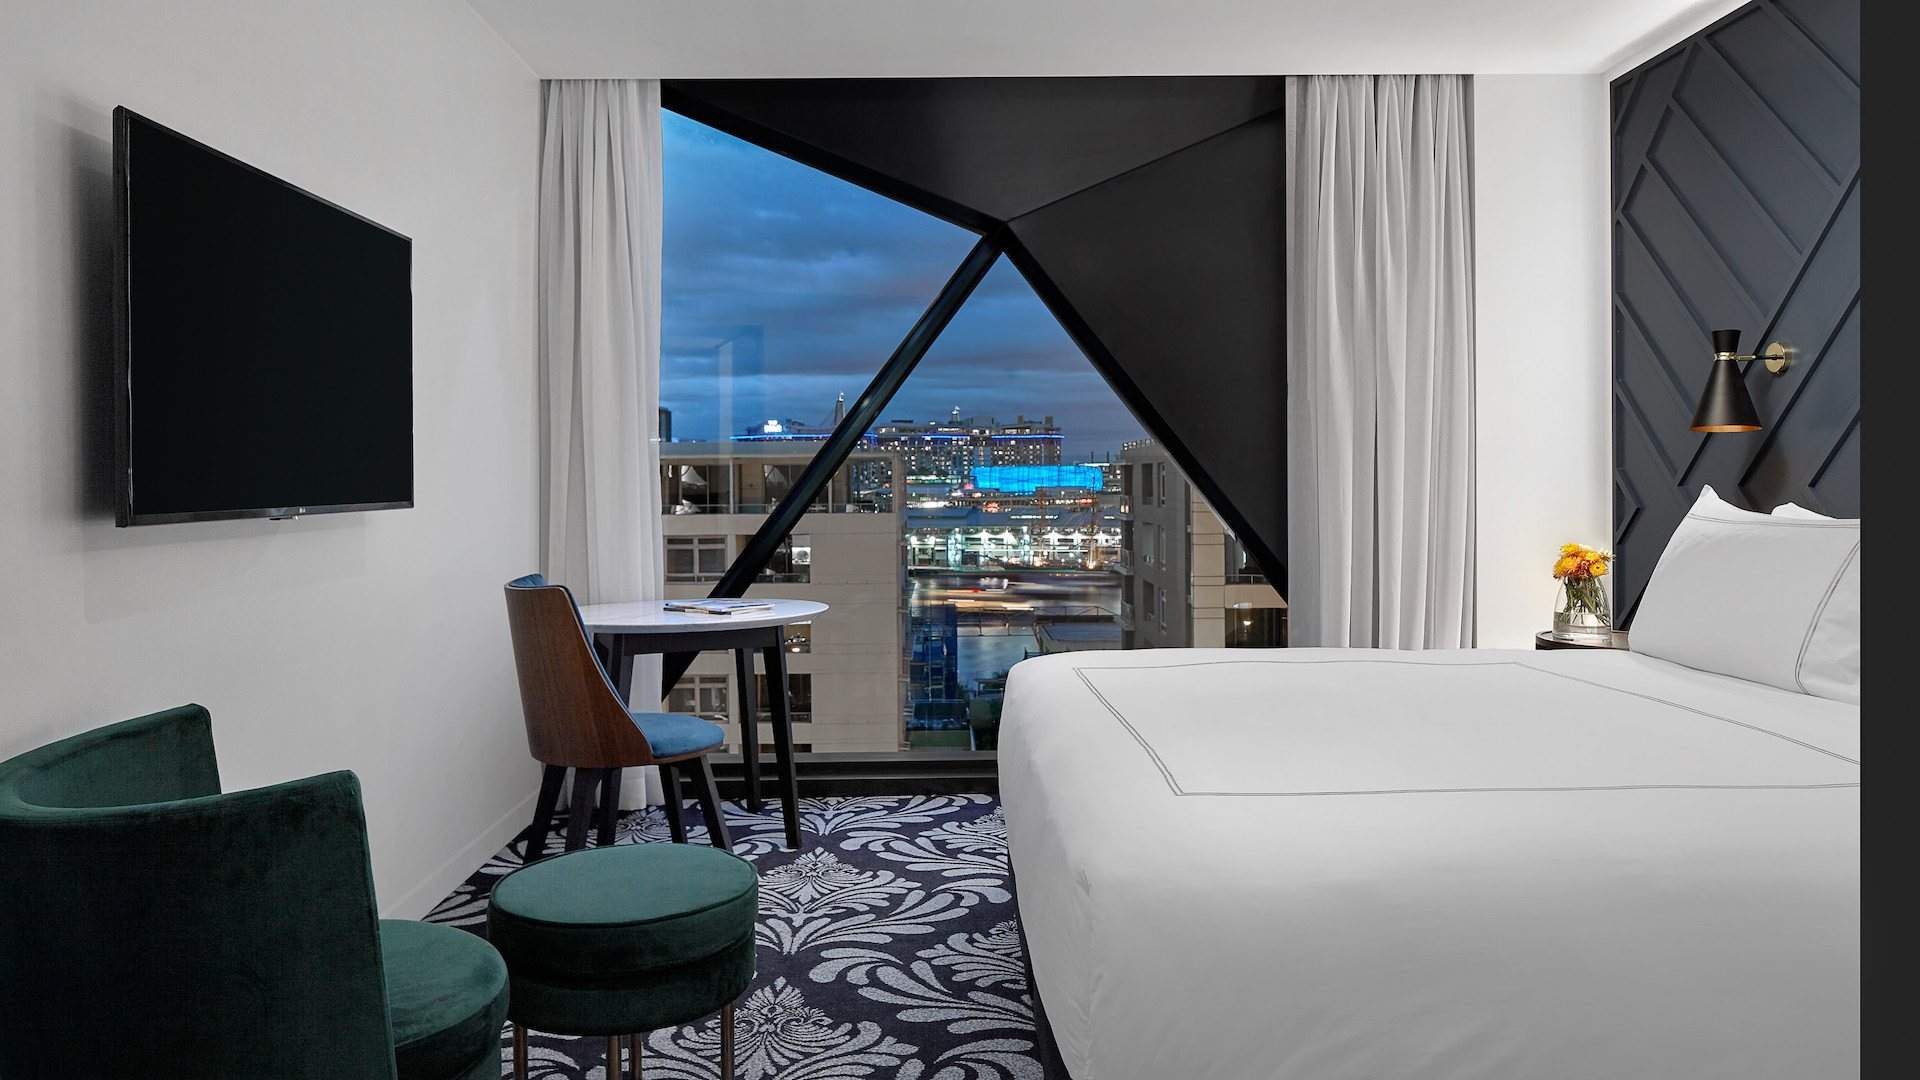 We're Giving Away a Luxe Staycation in the CBD